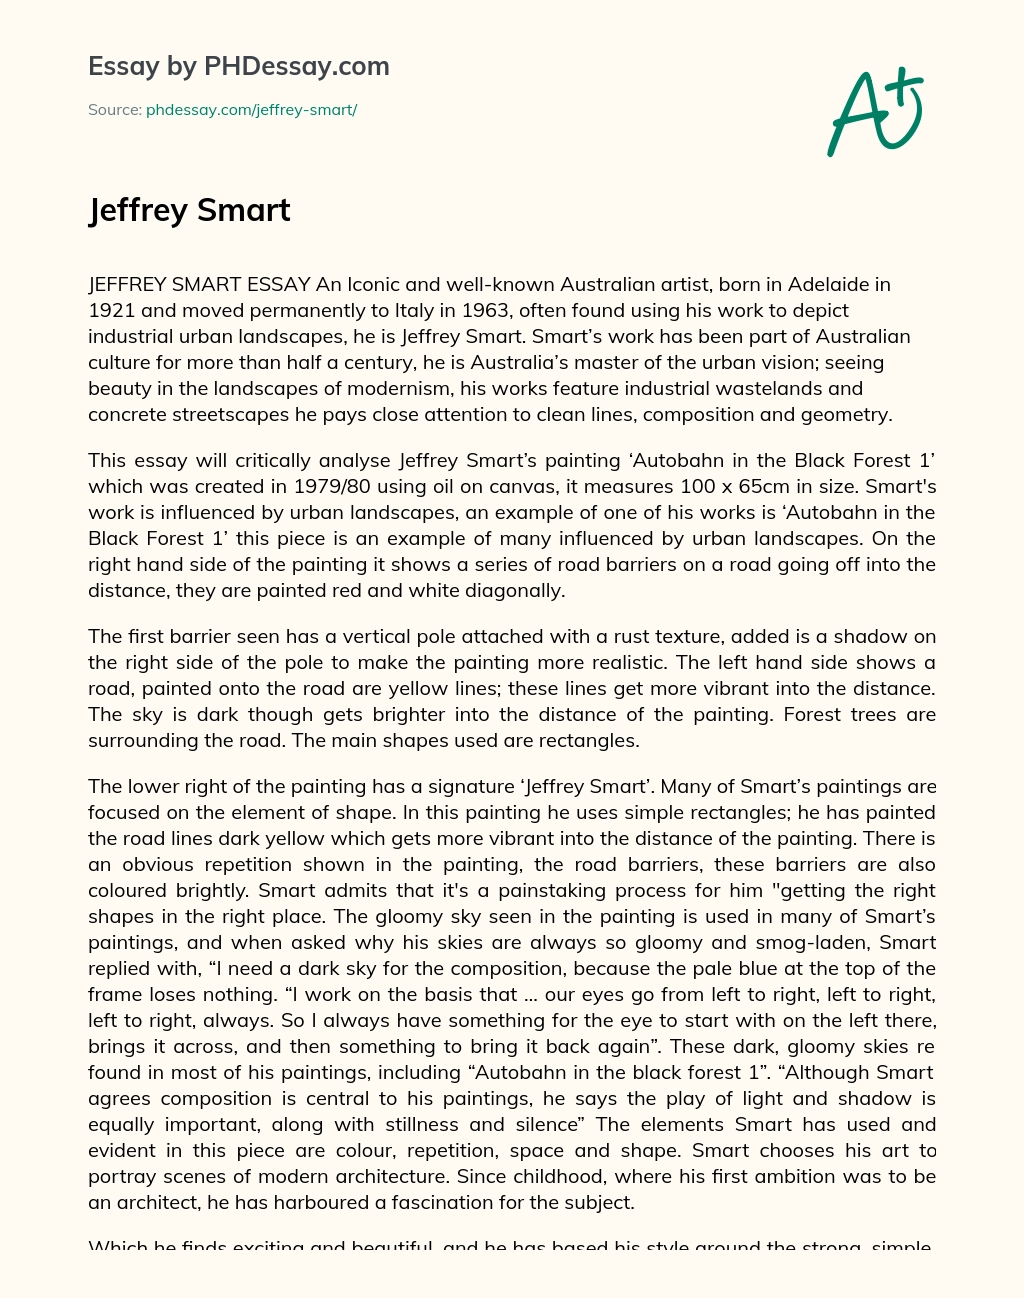 Jeffrey Smart’s Urban Vision: A Critical Analysis of ‘Autobahn in the Black Forest 1’ essay